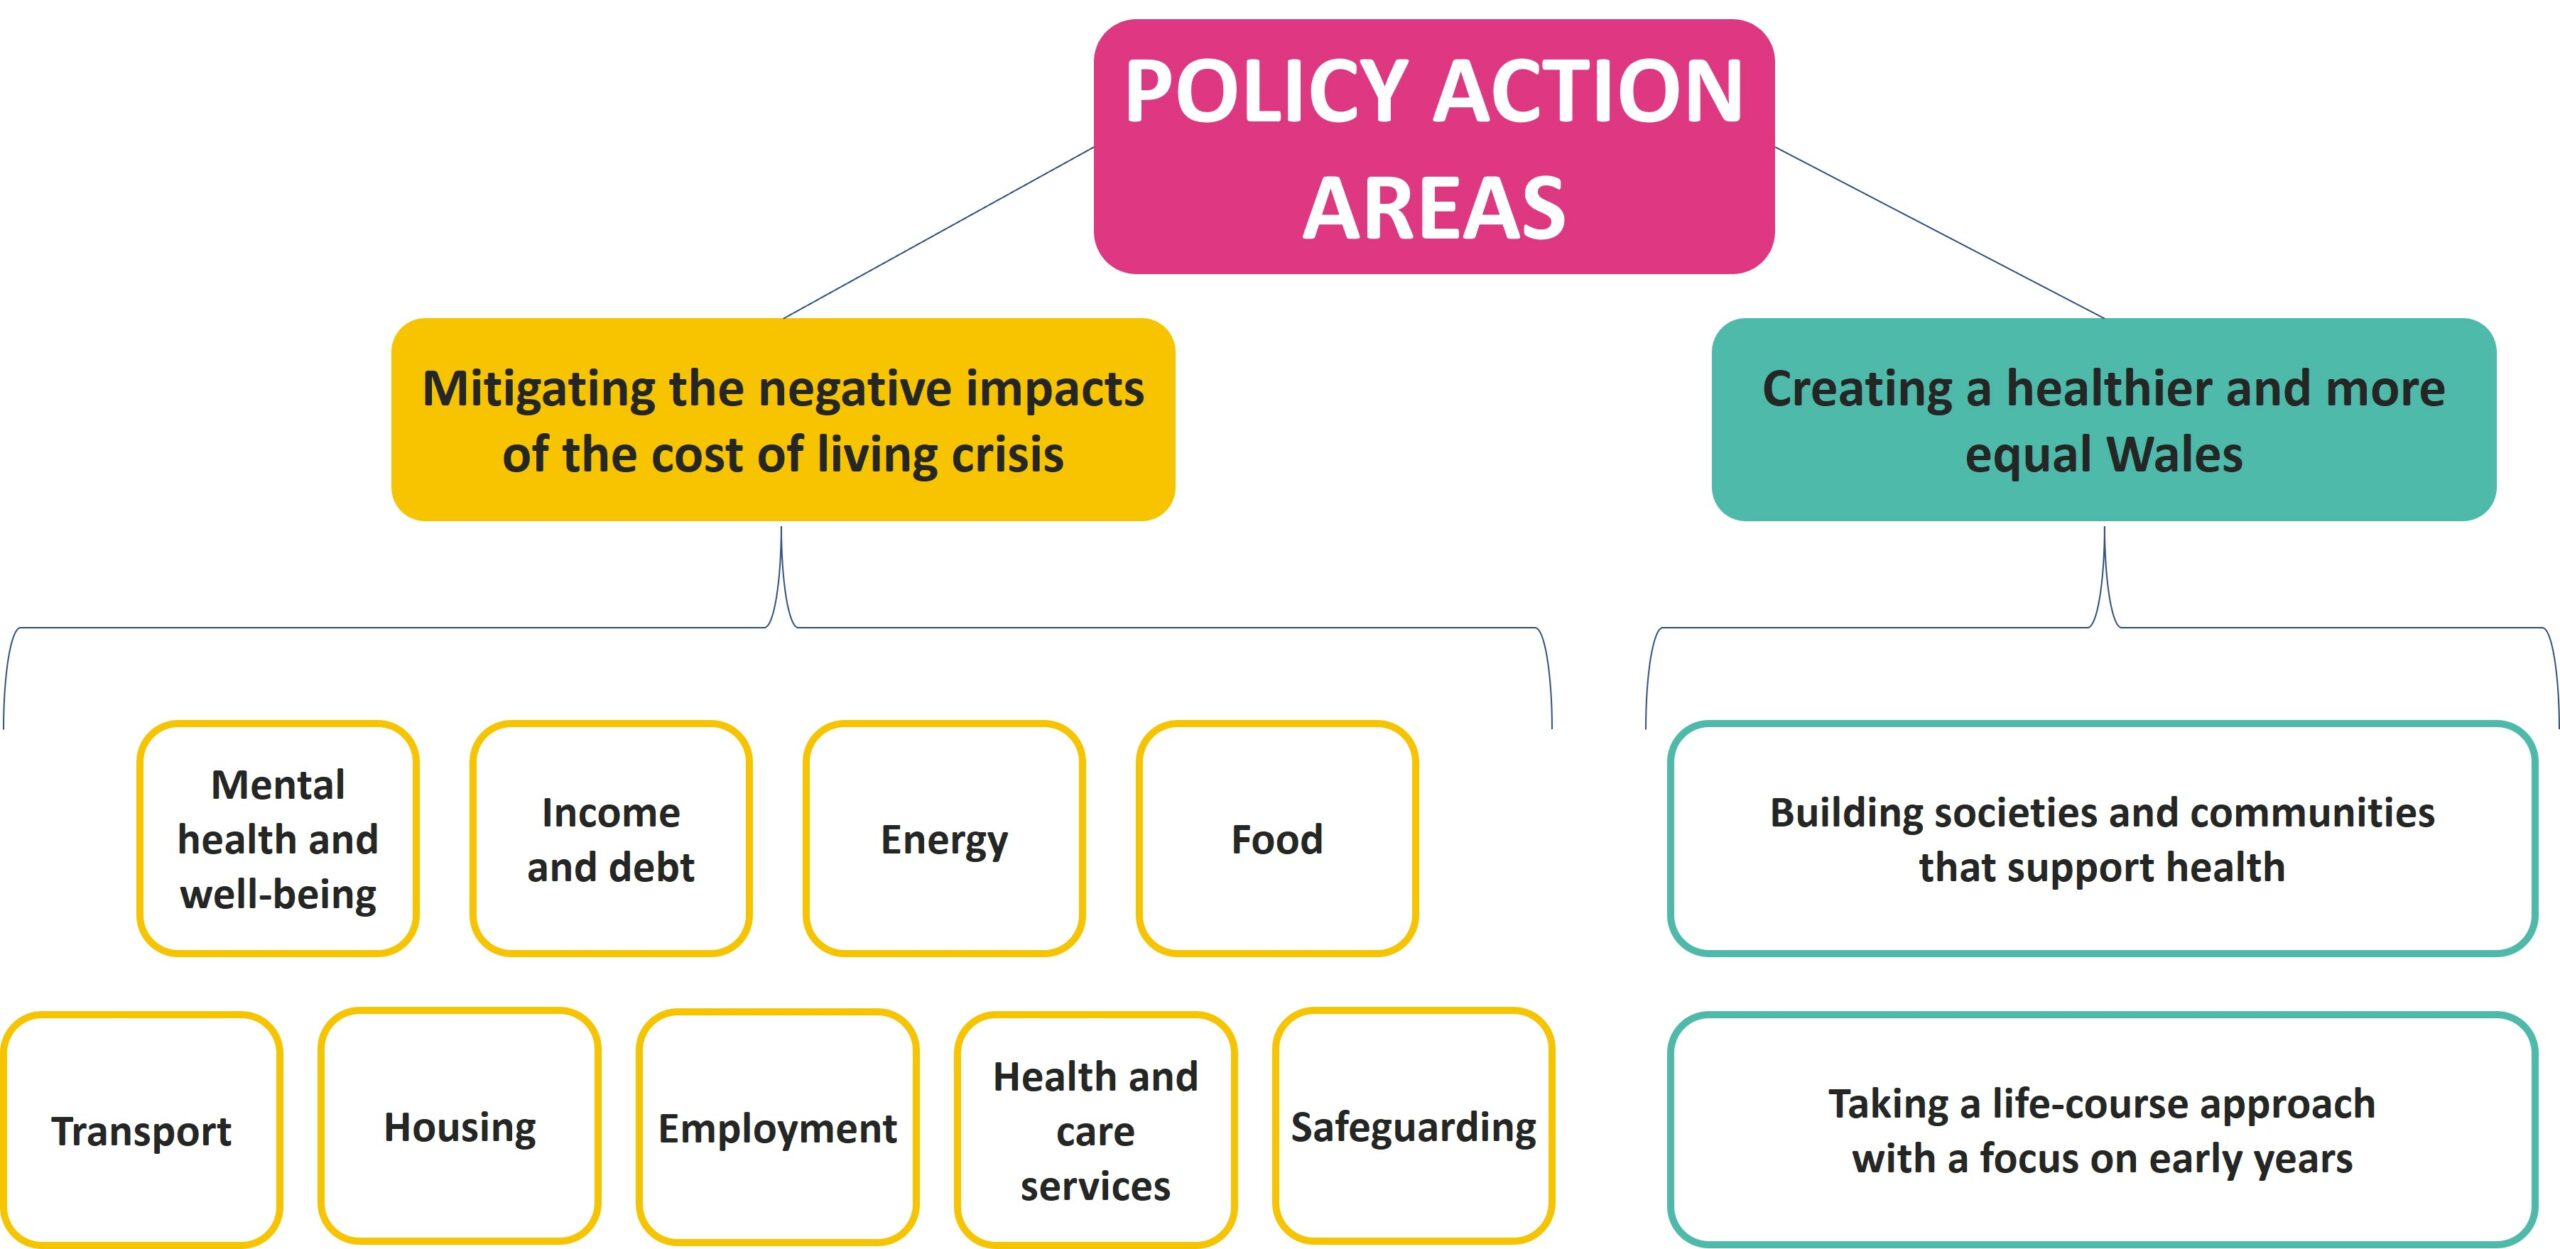 An infographic showing the priority policy action areas for mitigating the negative impacts of the cost of living crisis on health and wellbeing. These include mitigating the negative impacts on mental health, energy, and safeguarding. 